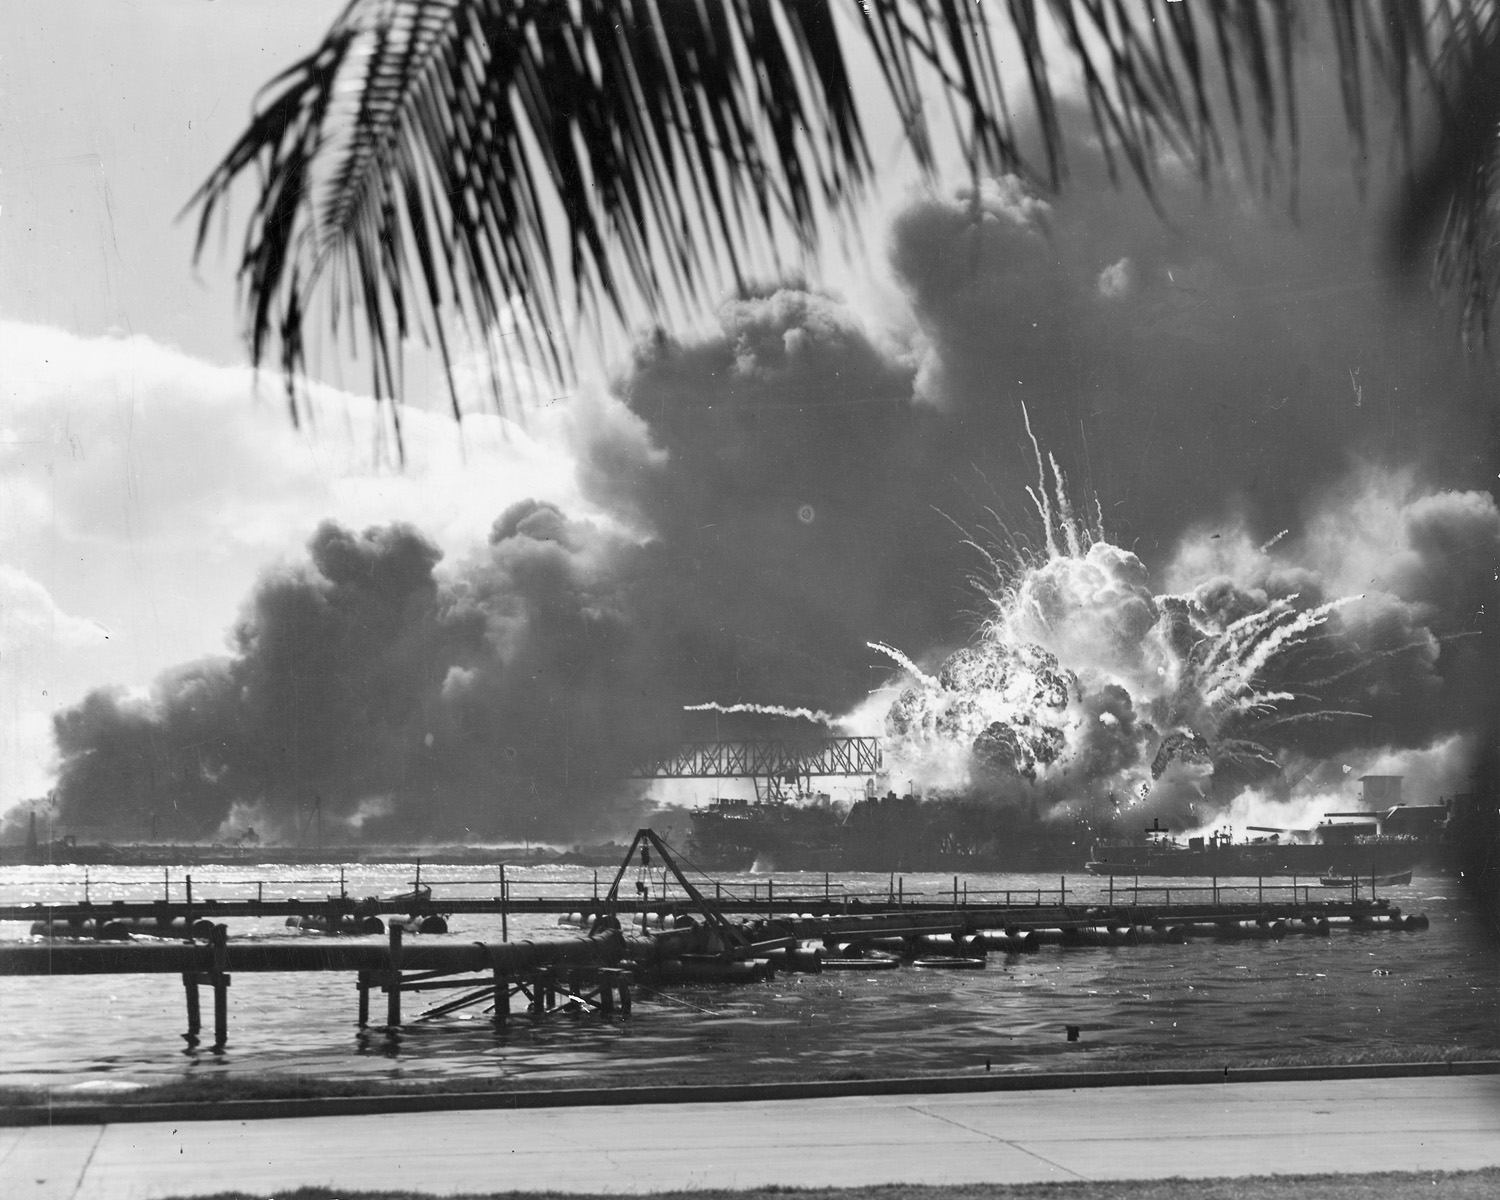 Photo capturing the moment the powder magazine of the USS Shaw exploded during the Pearl Harbor Attack, 7 Dec 1941 at about 0930. Note the after turrets of the USS Nevada passing in the channel at right.